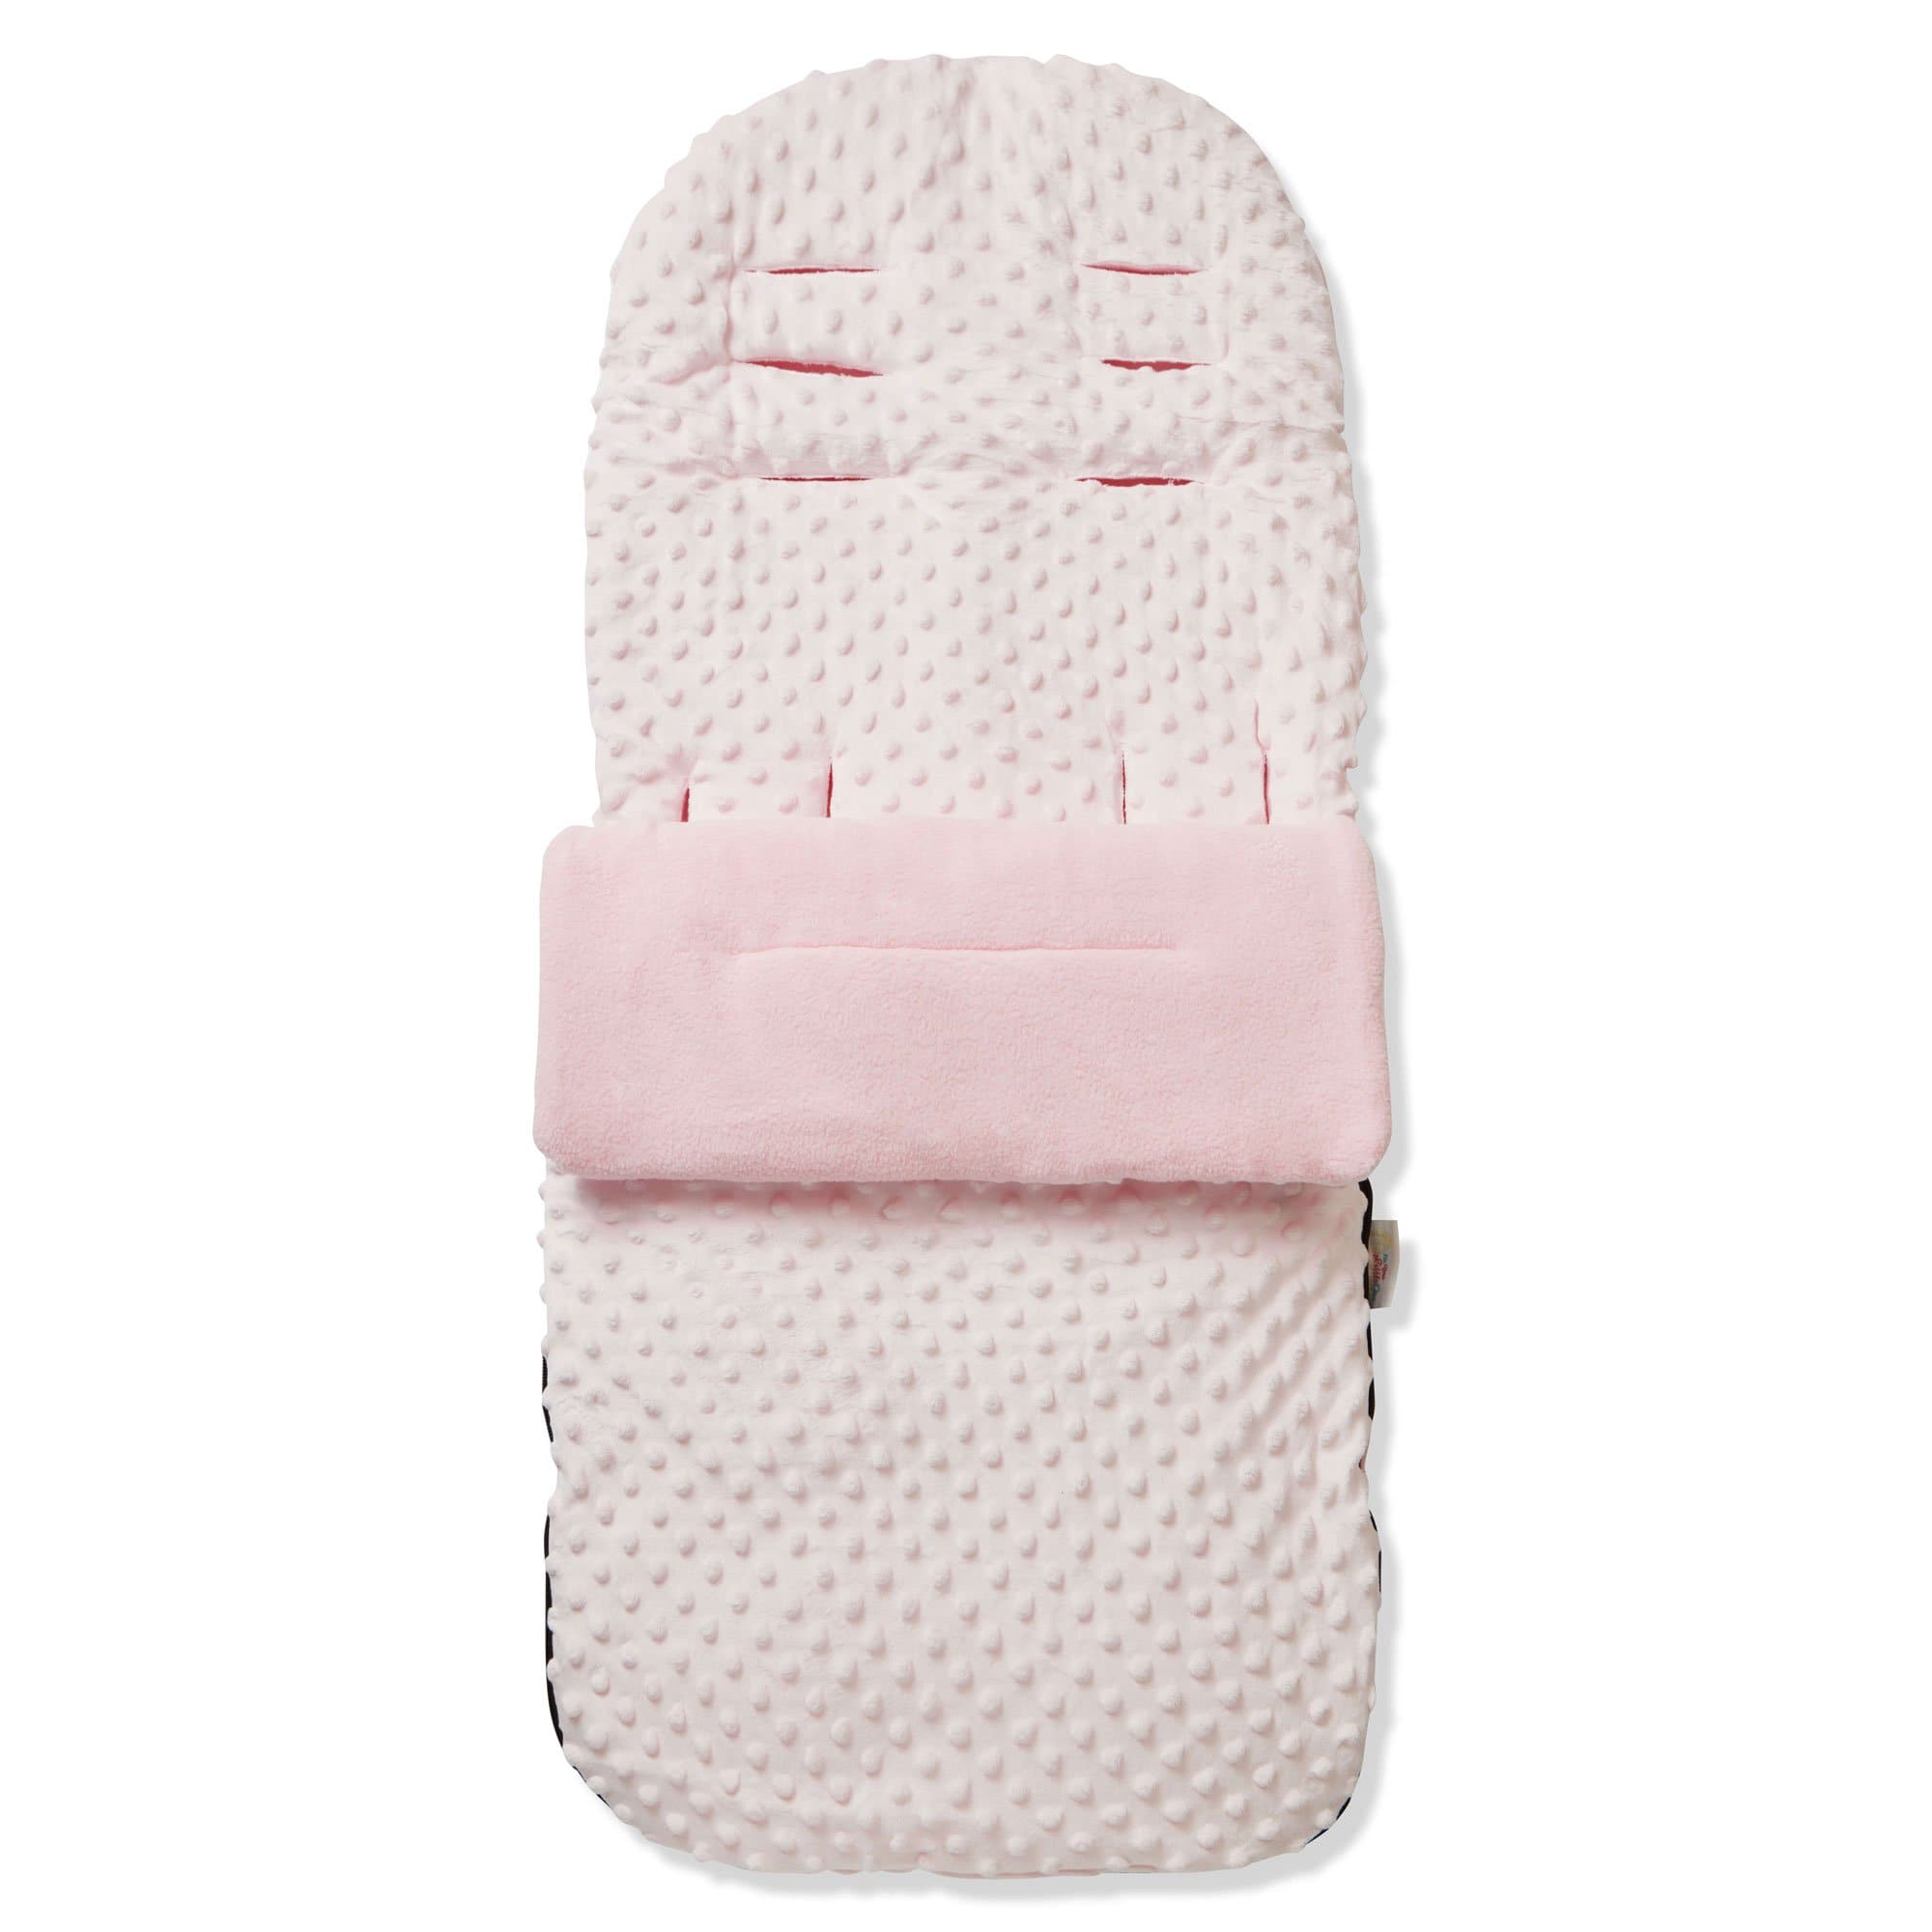 Dimple Footmuff / Cosy Toes Compatible with Koelstra - Pink / Fits All Models | For Your Little One